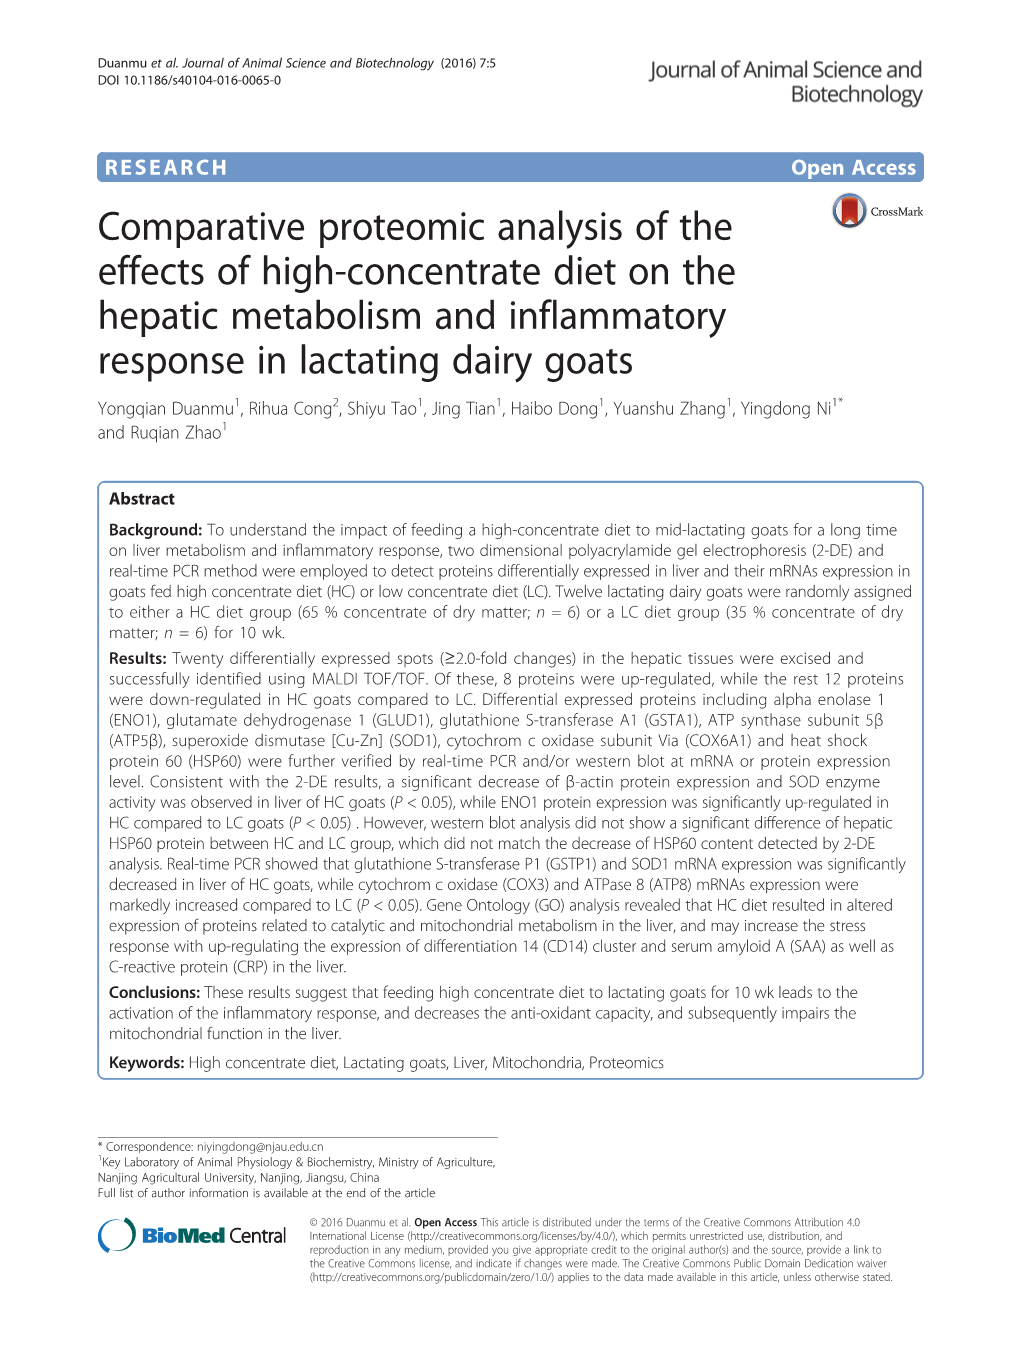 Comparative Proteomic Analysis of the Effects of High-Concentrate Diet On